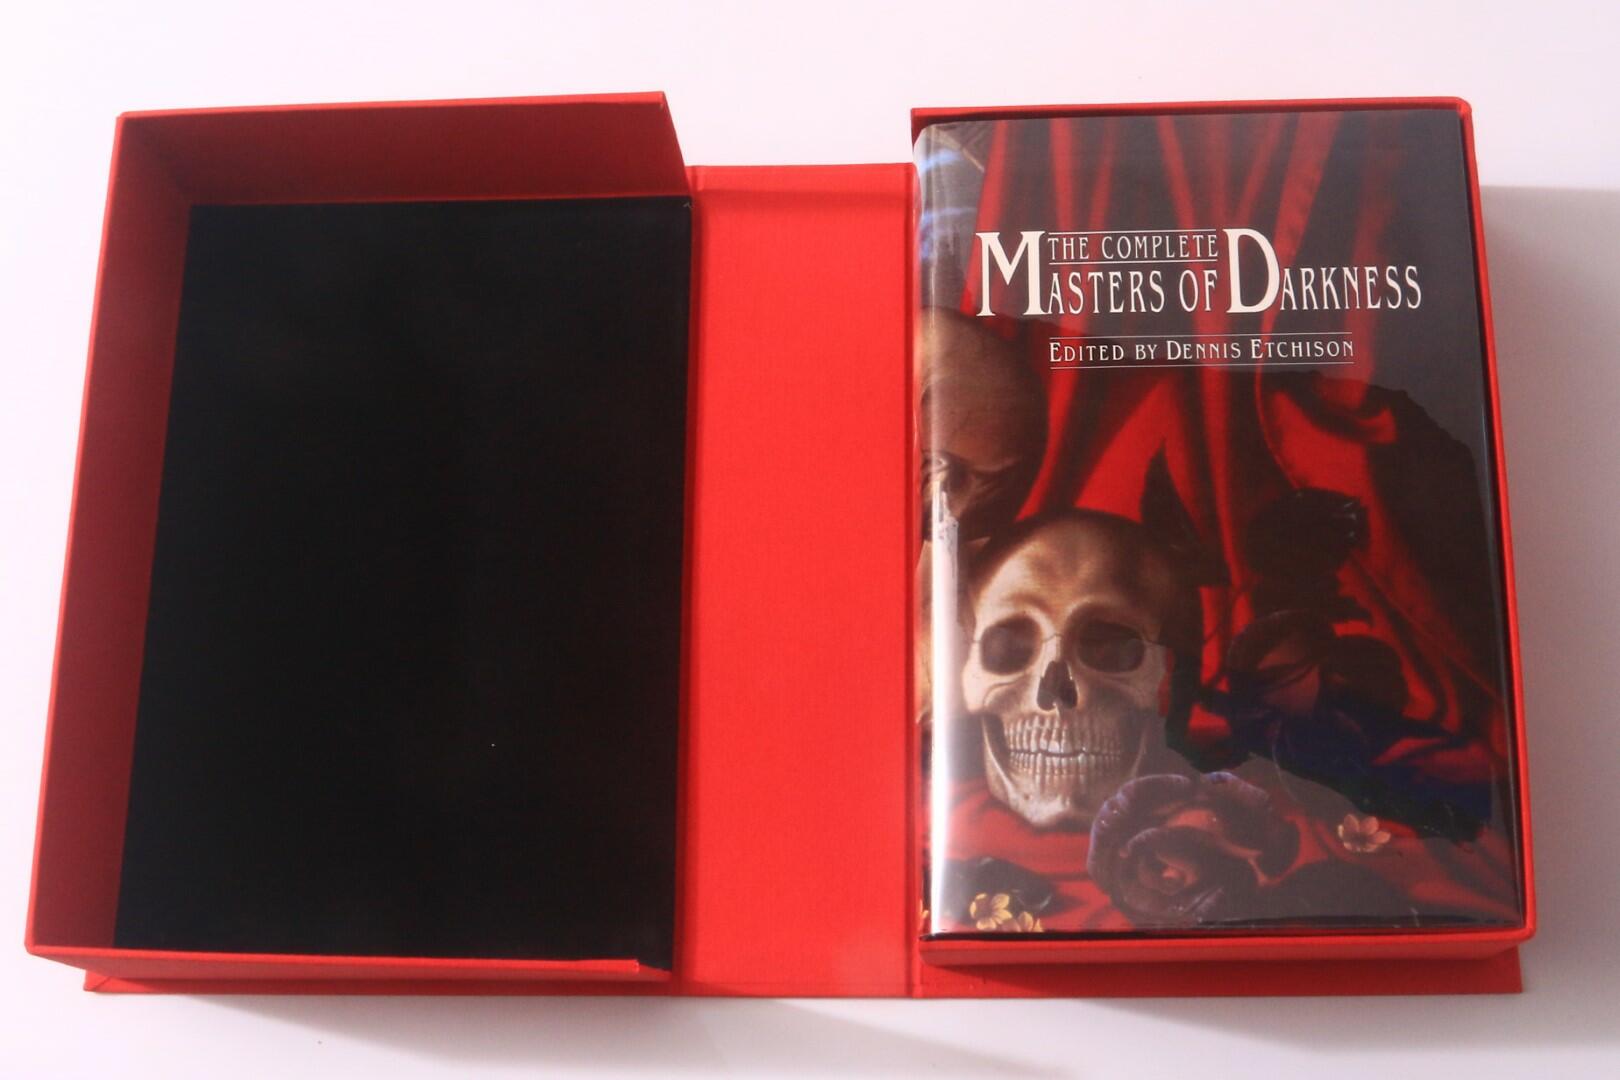 Dennis Etchison [ed.] - The Complete Masters of Darkness - Underwood Miller, 1991, Signed Limited Edition.